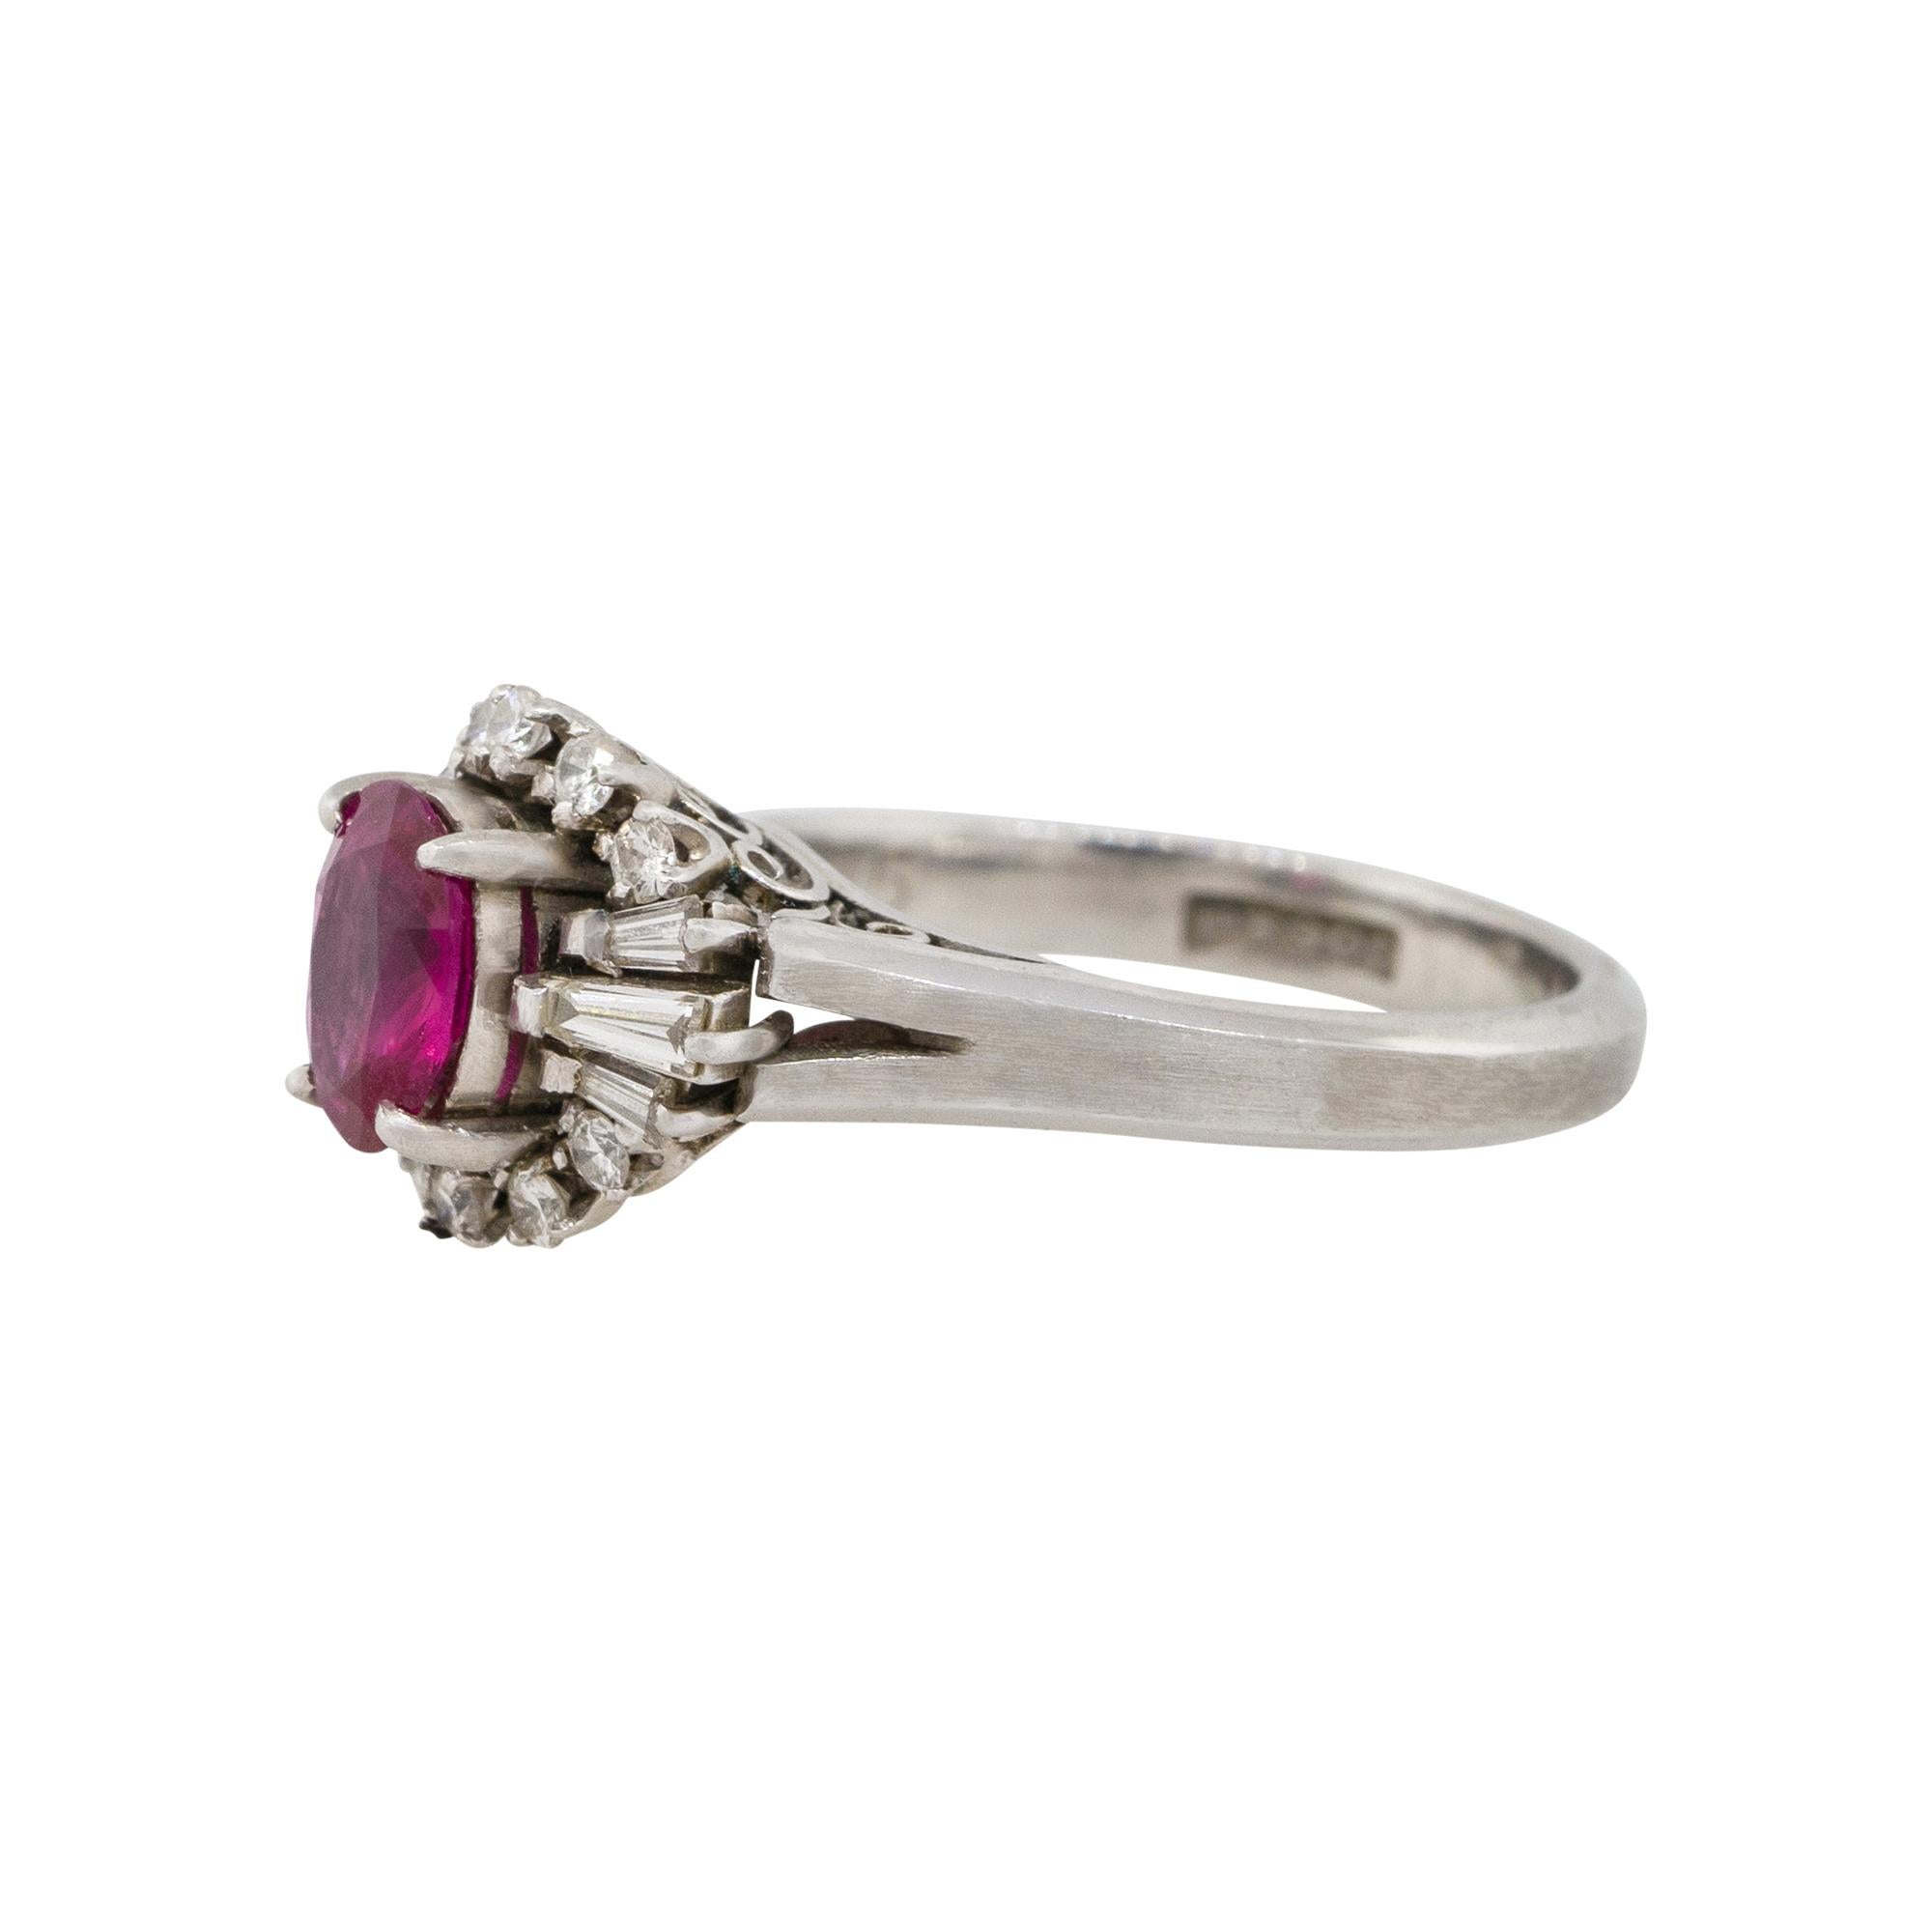 0.75 Carat Oval Cut Ruby Diamond Cocktail Ring Platinum in Stock In New Condition For Sale In Boca Raton, FL